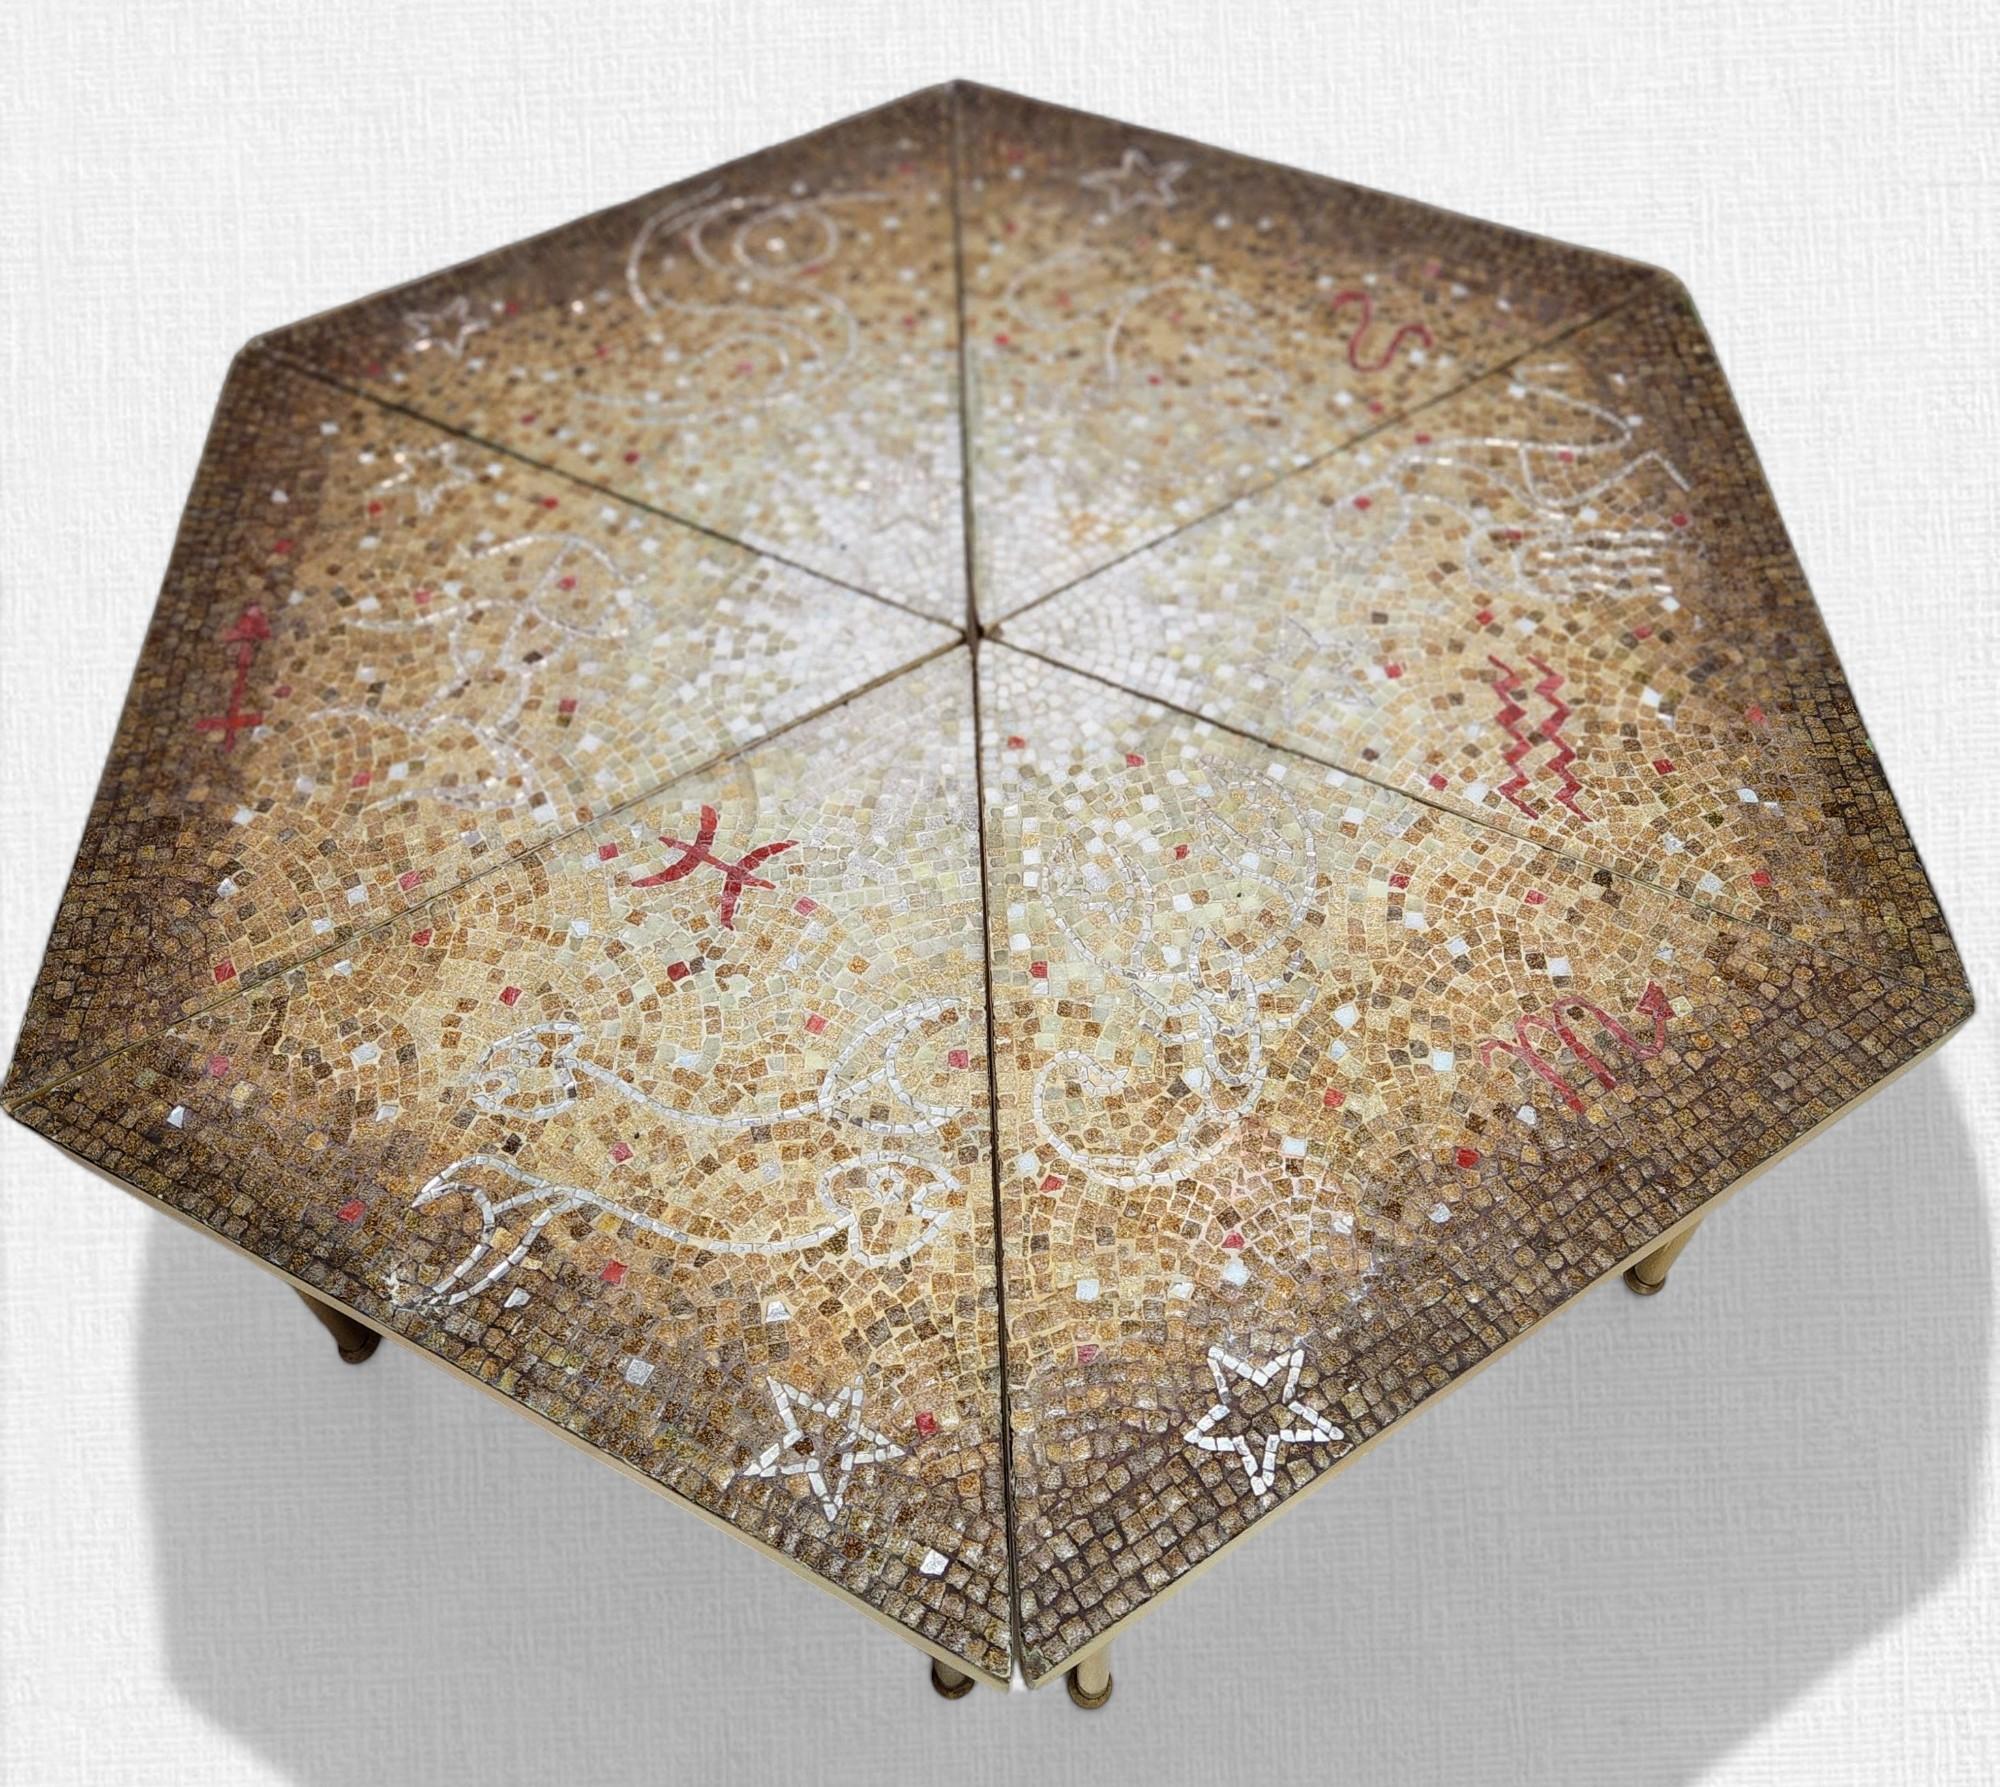 Six Piece Studio Mosaic table by Genaro Alvarez composed of. Intricate inlaid glass mosaic designs based on 6 zodiac constellations, on six triangular, interchangeable mahogany bases created at the Genaro Alvarez's Studio in Mexico City in the